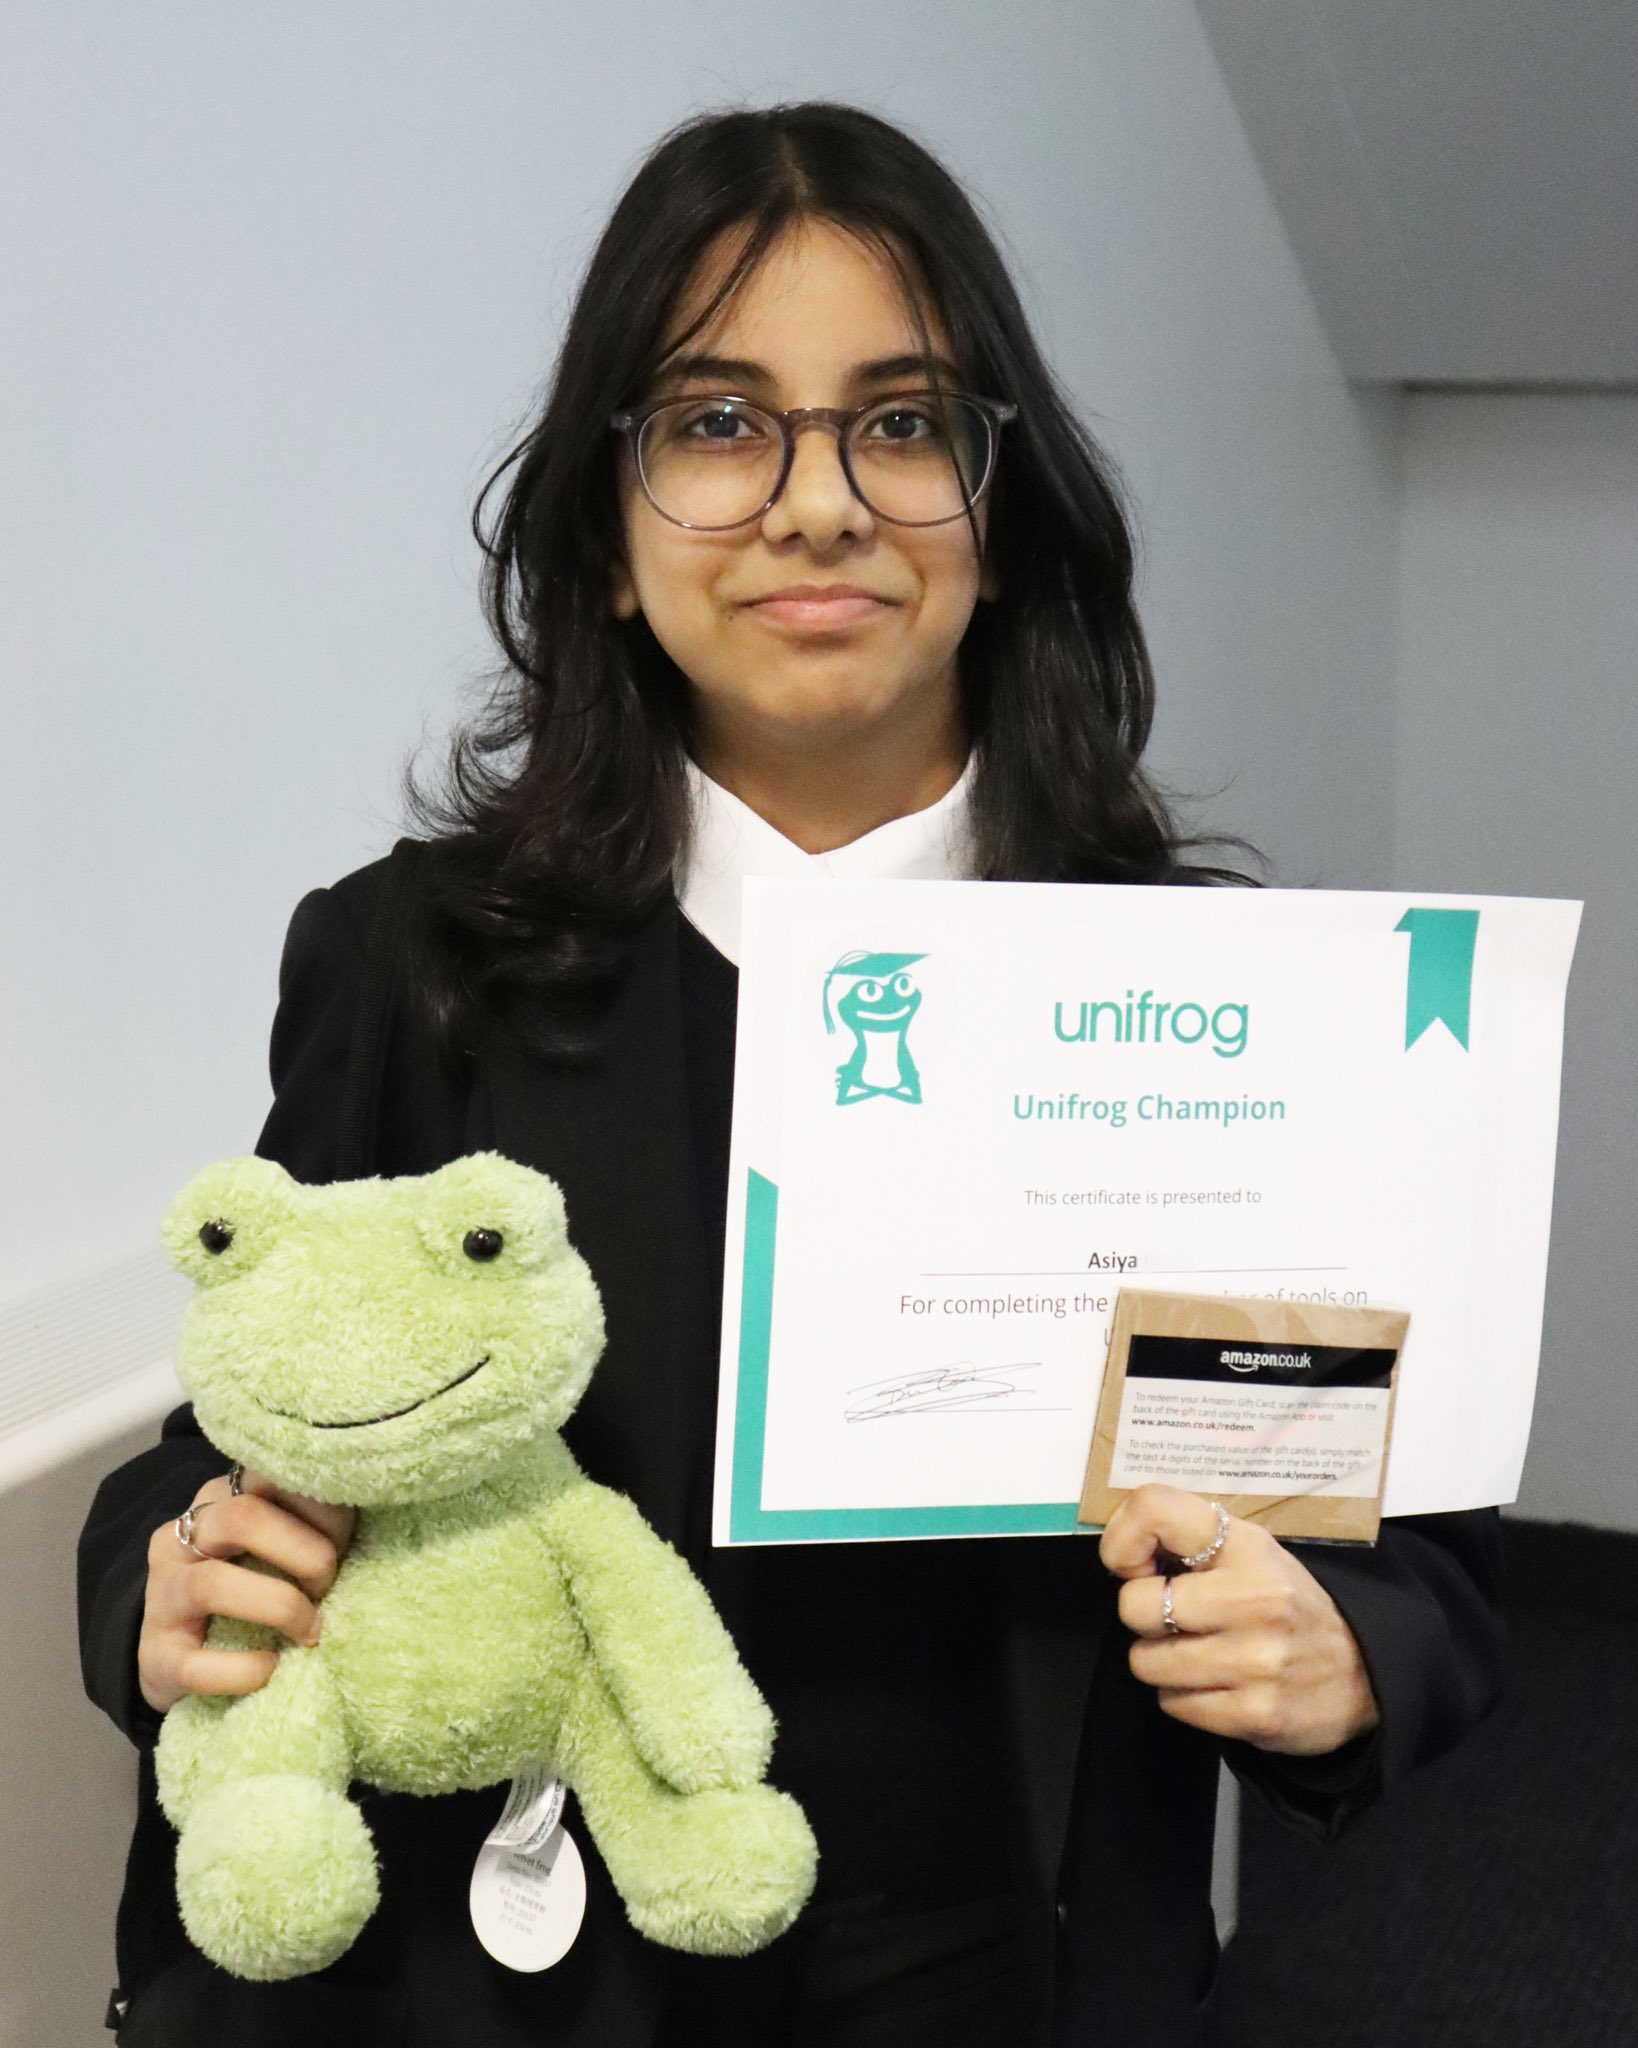 stratford-school-academy-on-twitter-congratulations-to-our-top-two-unifrog-users-year9